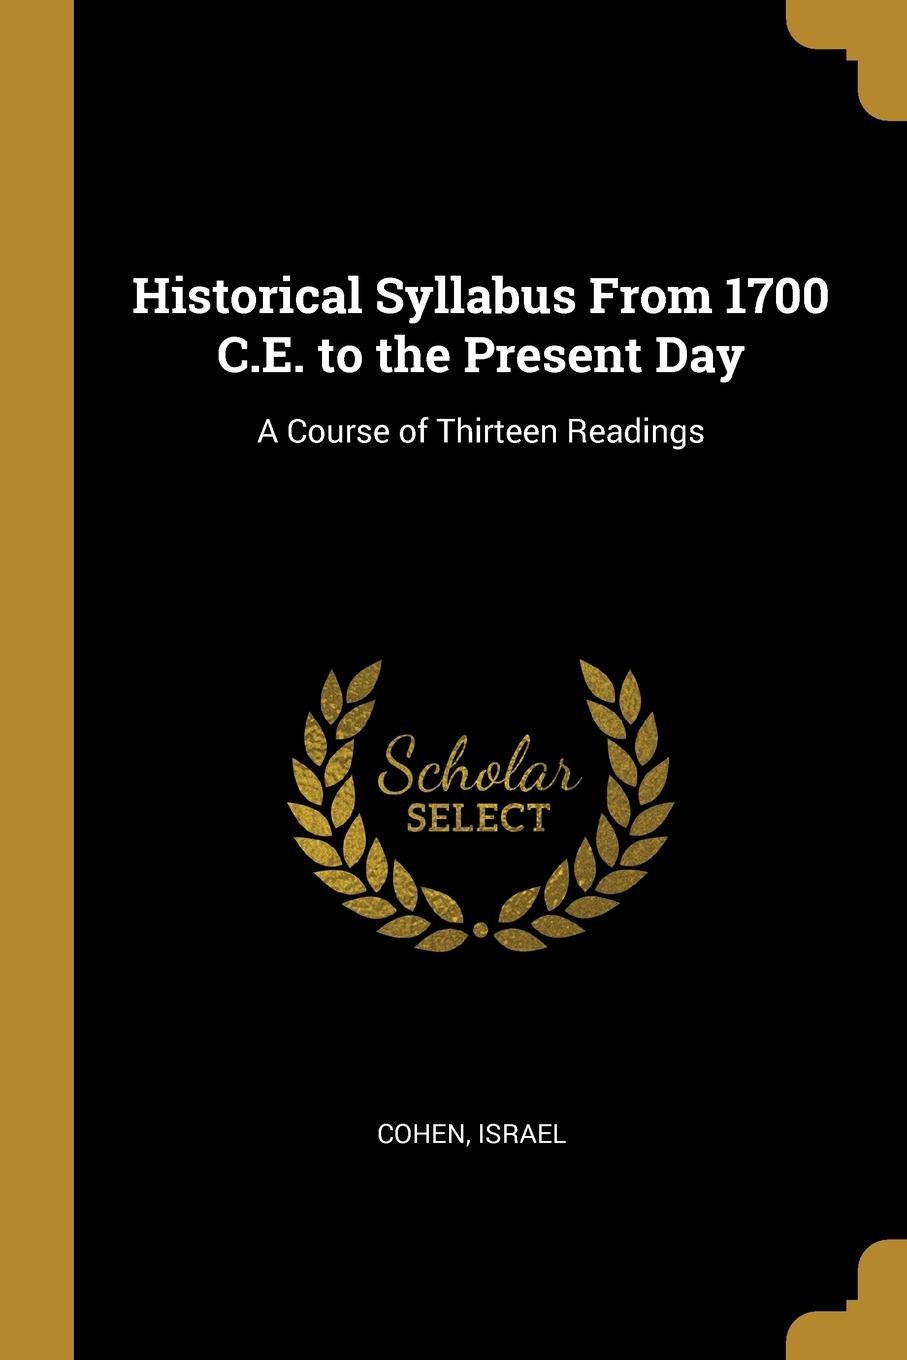 Historical Syllabus From 1700 C.E. to the Present Day. A Course of Thirteen Readings